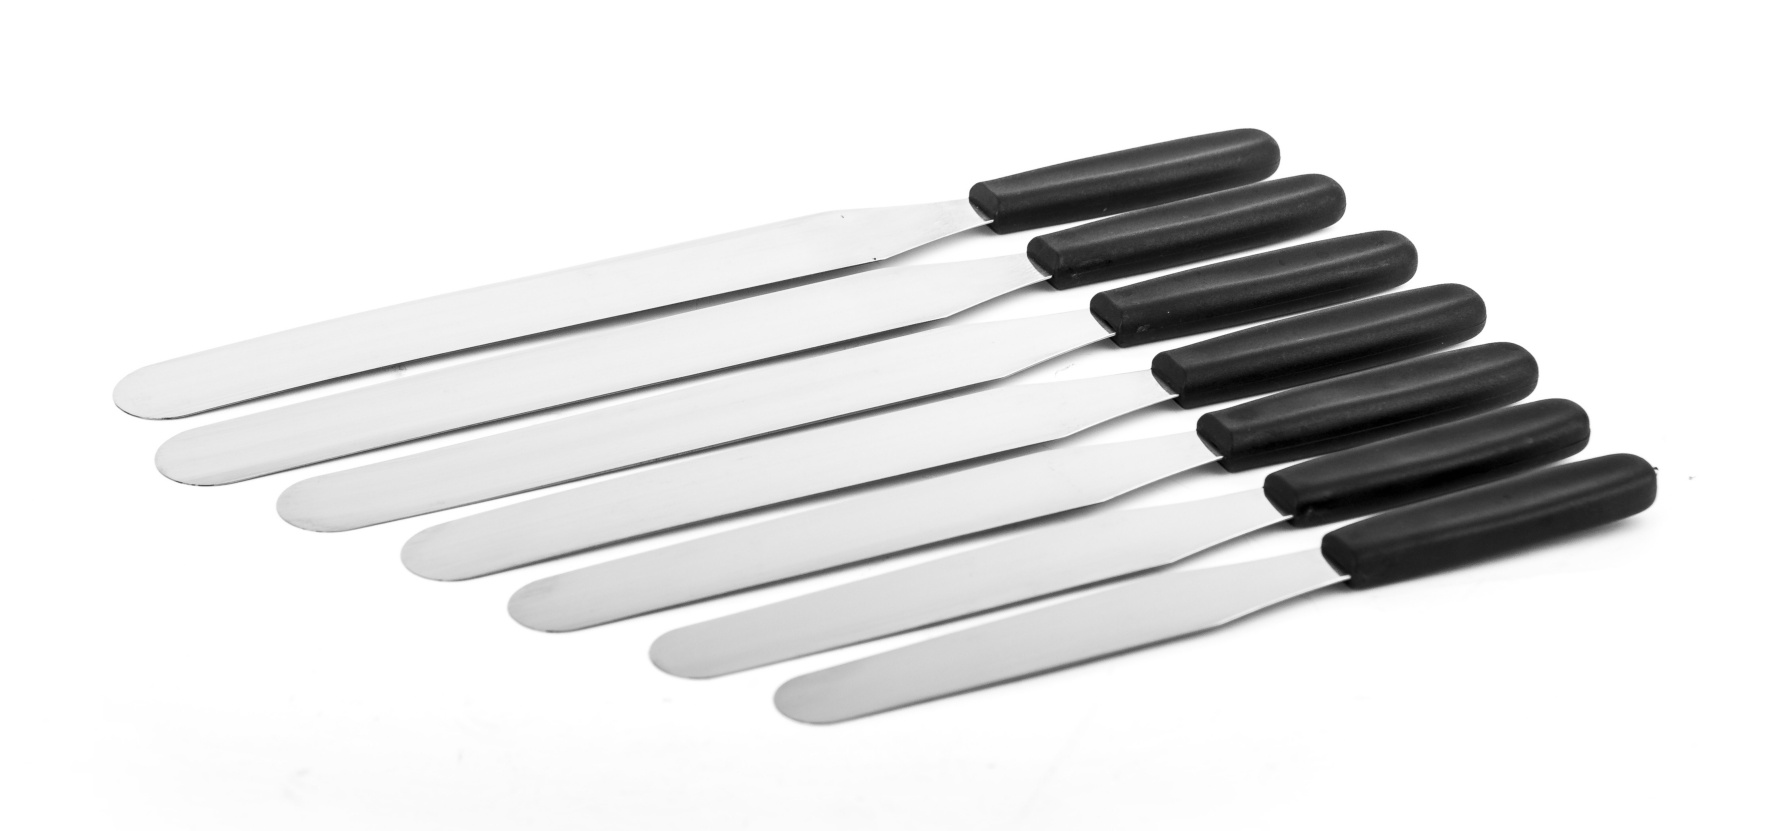 6 Inch Pastry Knife Bread Knife for Bakery